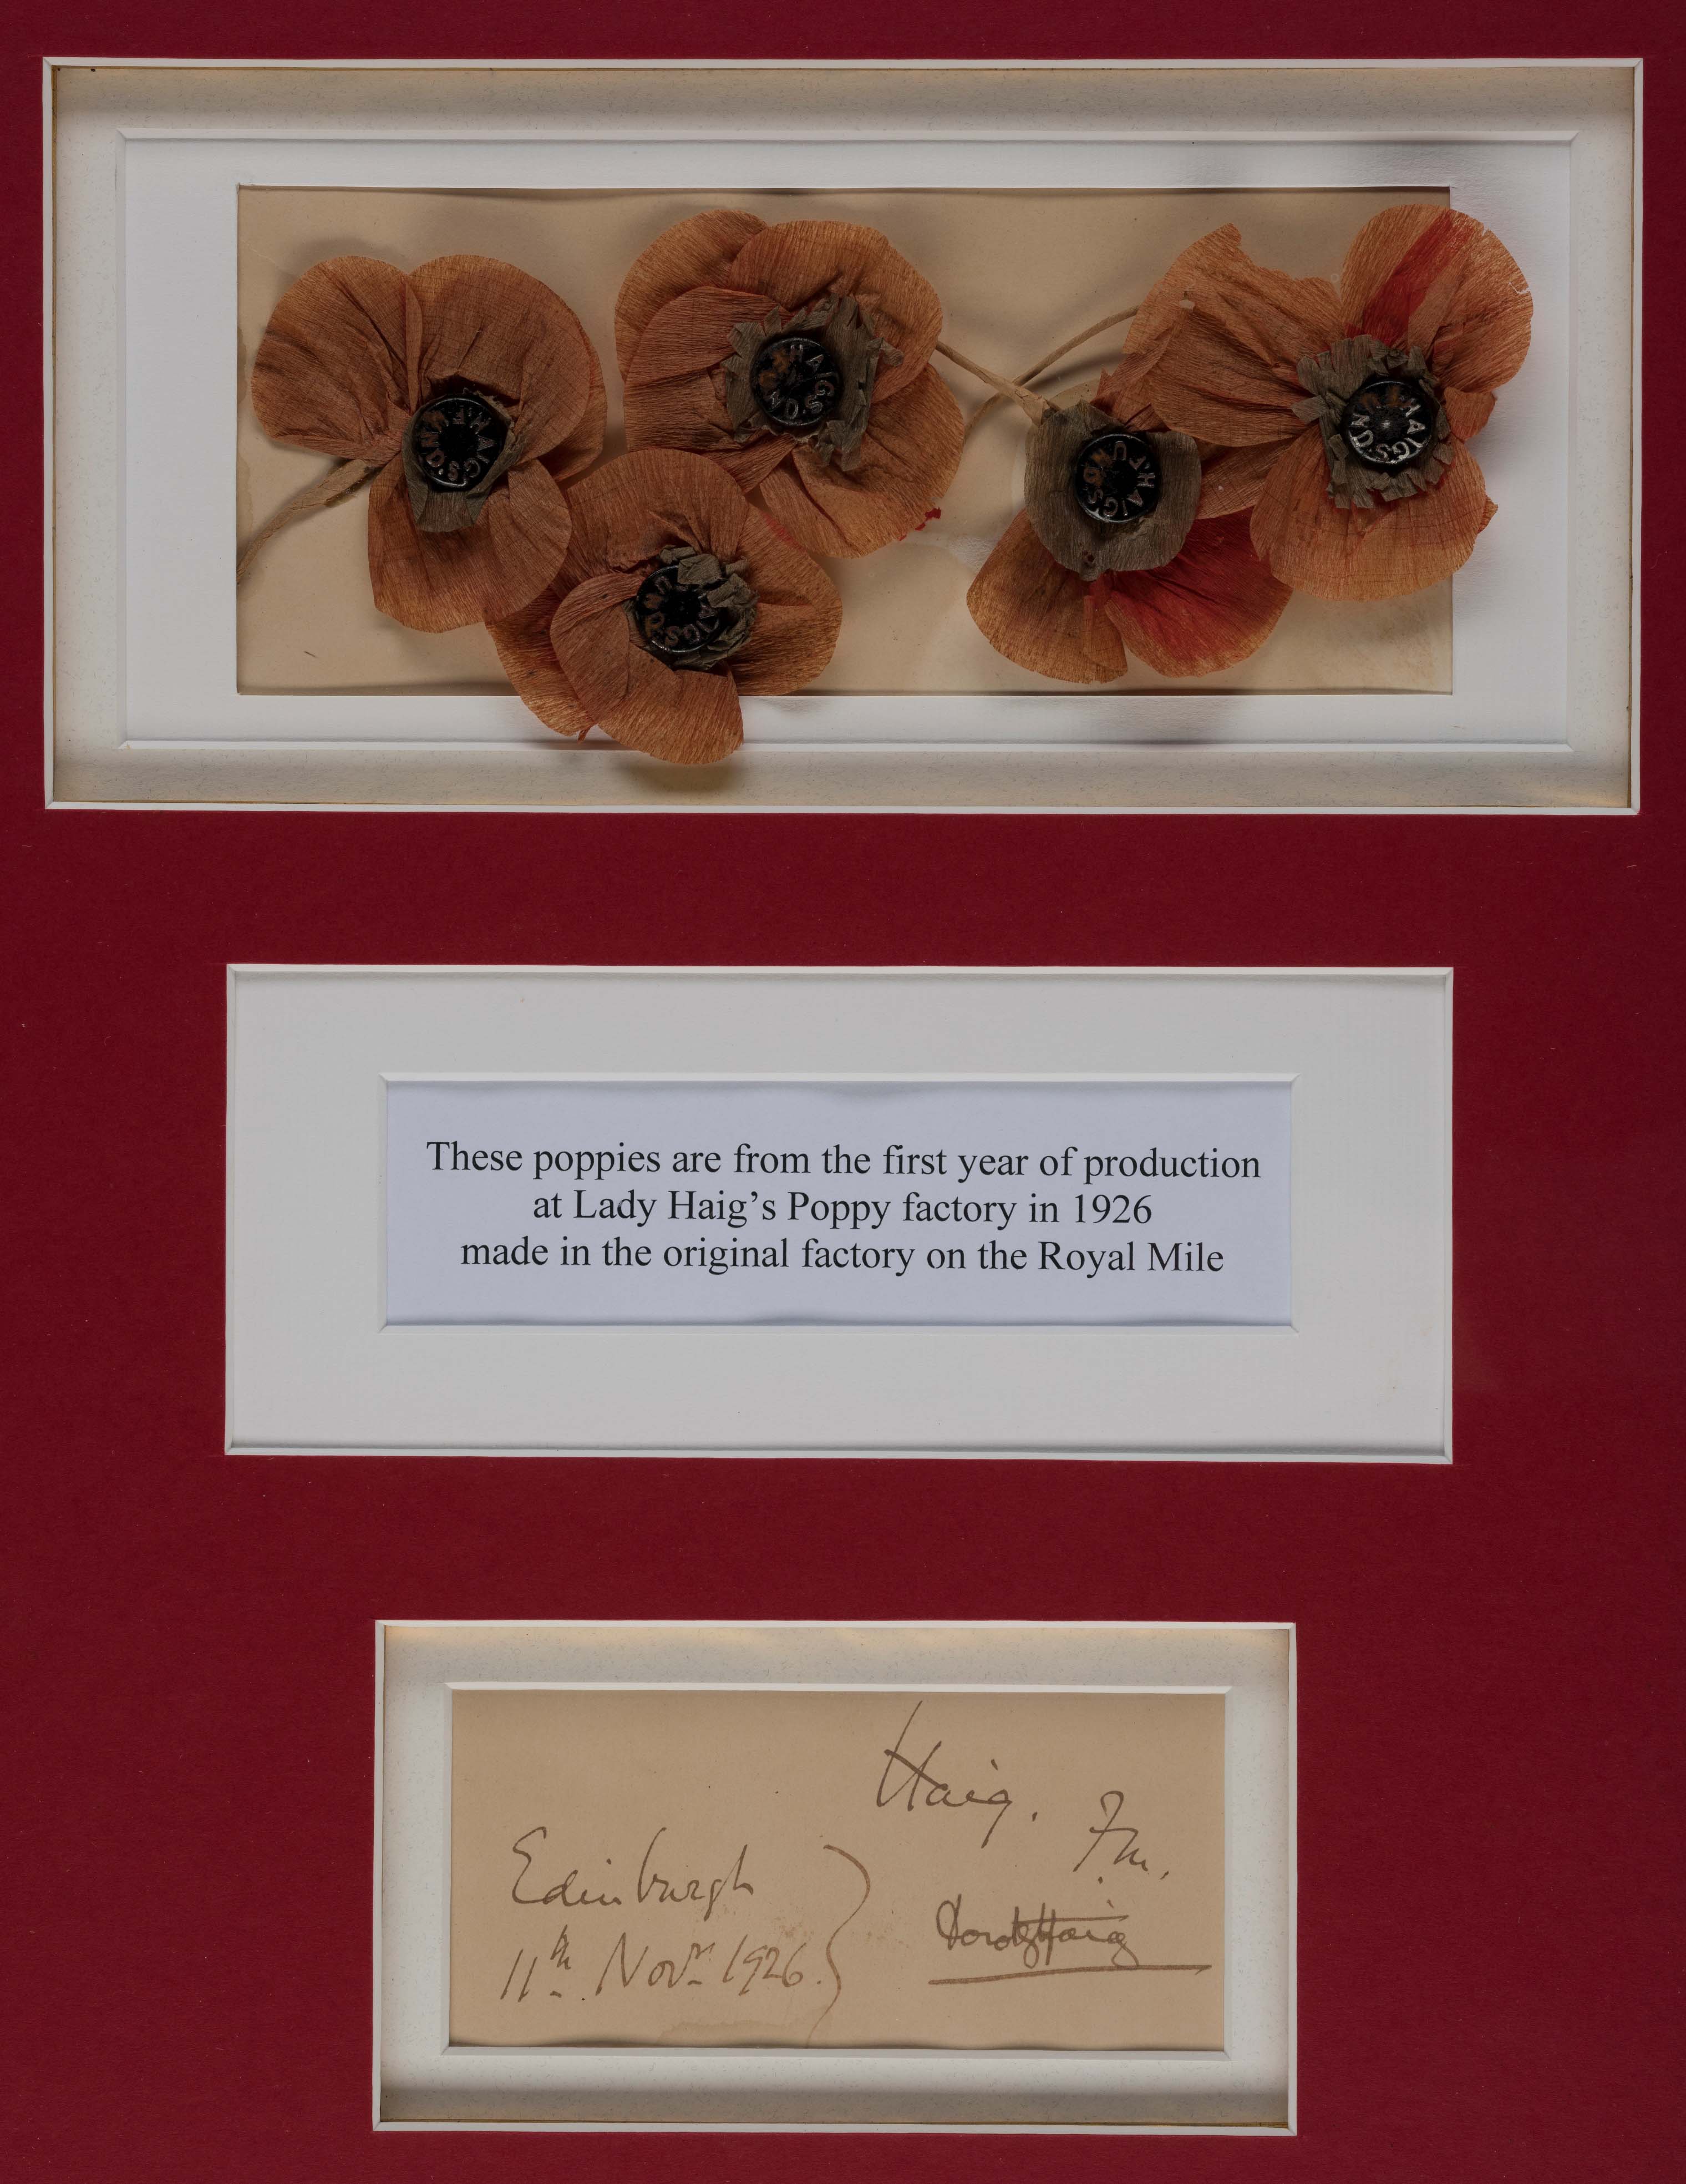 Poppies from the first year of production at Lady Haig's Poppy Factory